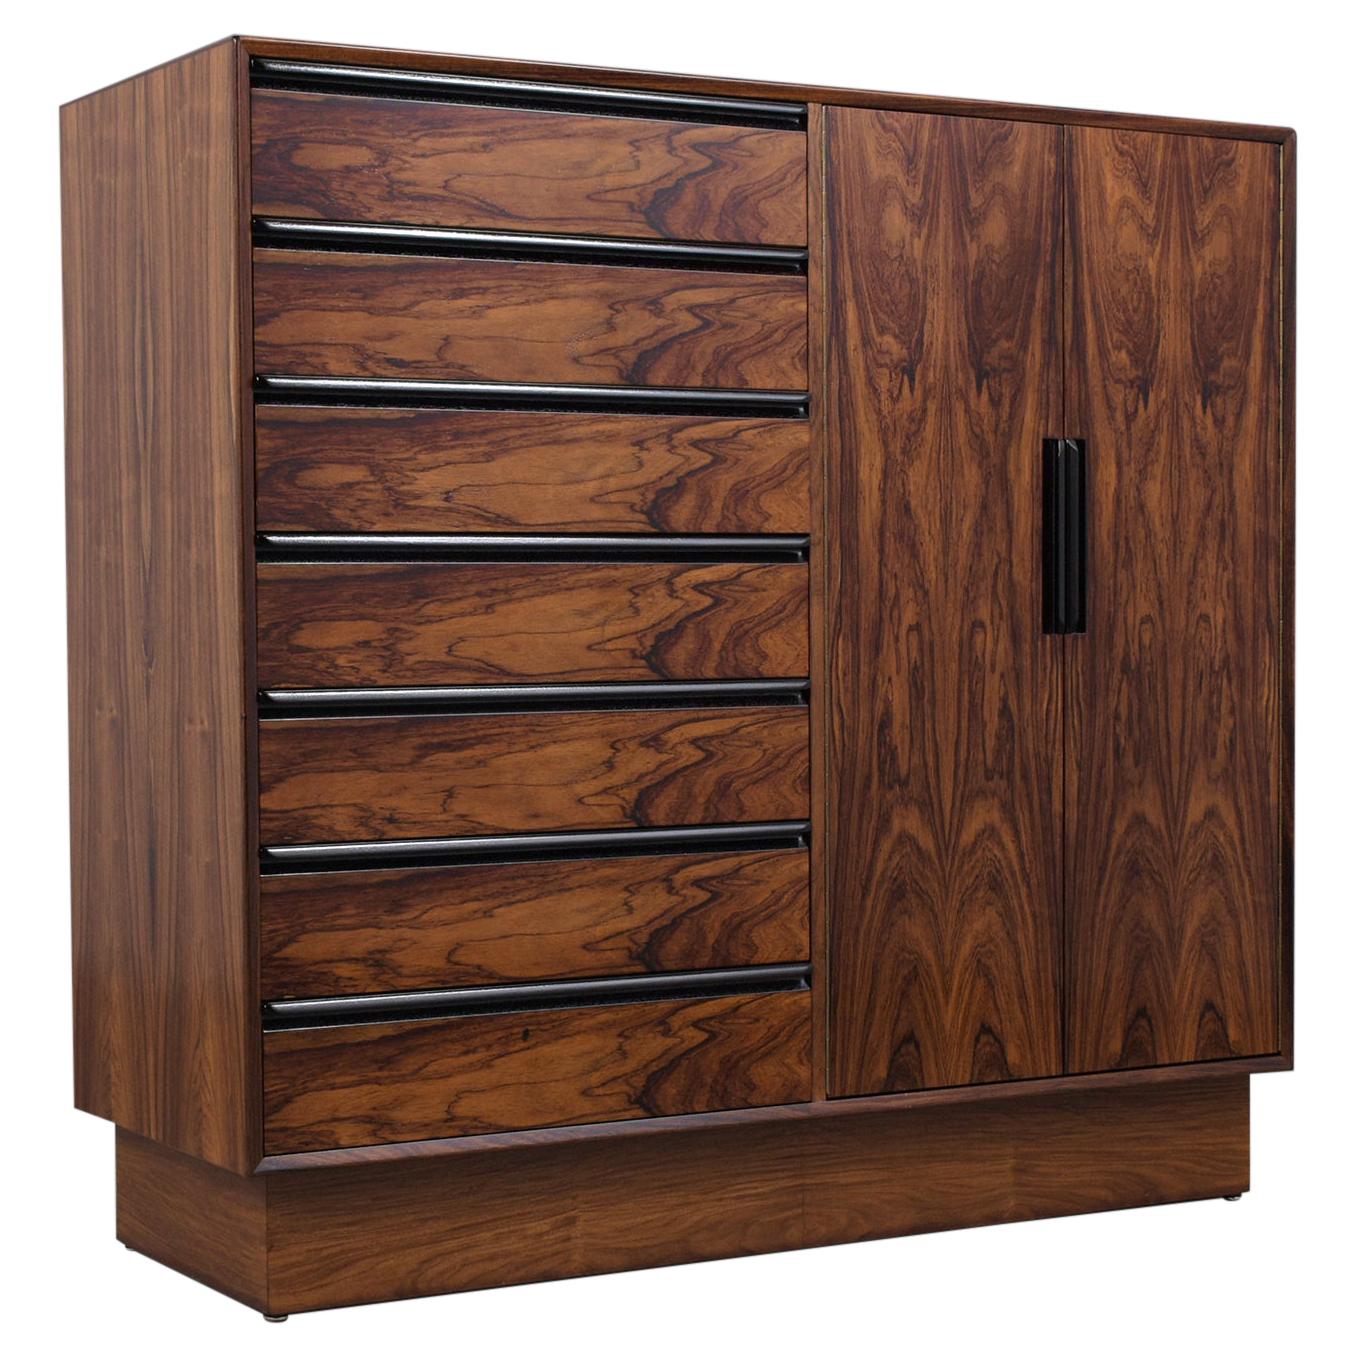 A remarkable Danish modern bachelor chest of drawers is hand-crafted out of rosewood, has been newly stained with a lacquered finish, and is fully restored by our team of craftsmen. The dresser comes with seven interior drawers behind double doors,